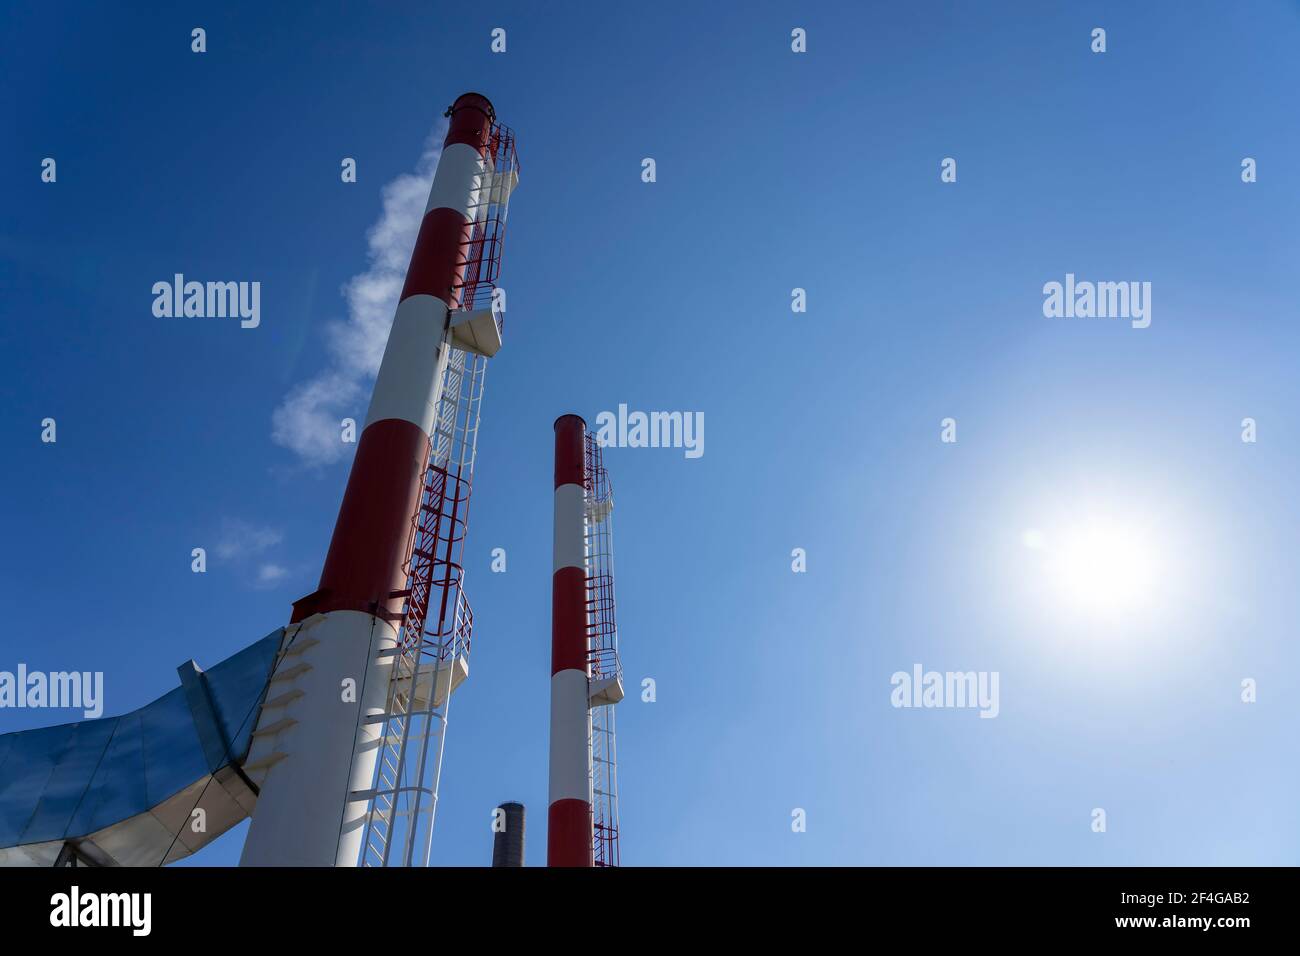 Smoke Coming Out from Industrial Power Plant Chimneys. District Heating Plant Exterior With Industrial Chimneys Against the Sun and Blue Sky. Stock Photo